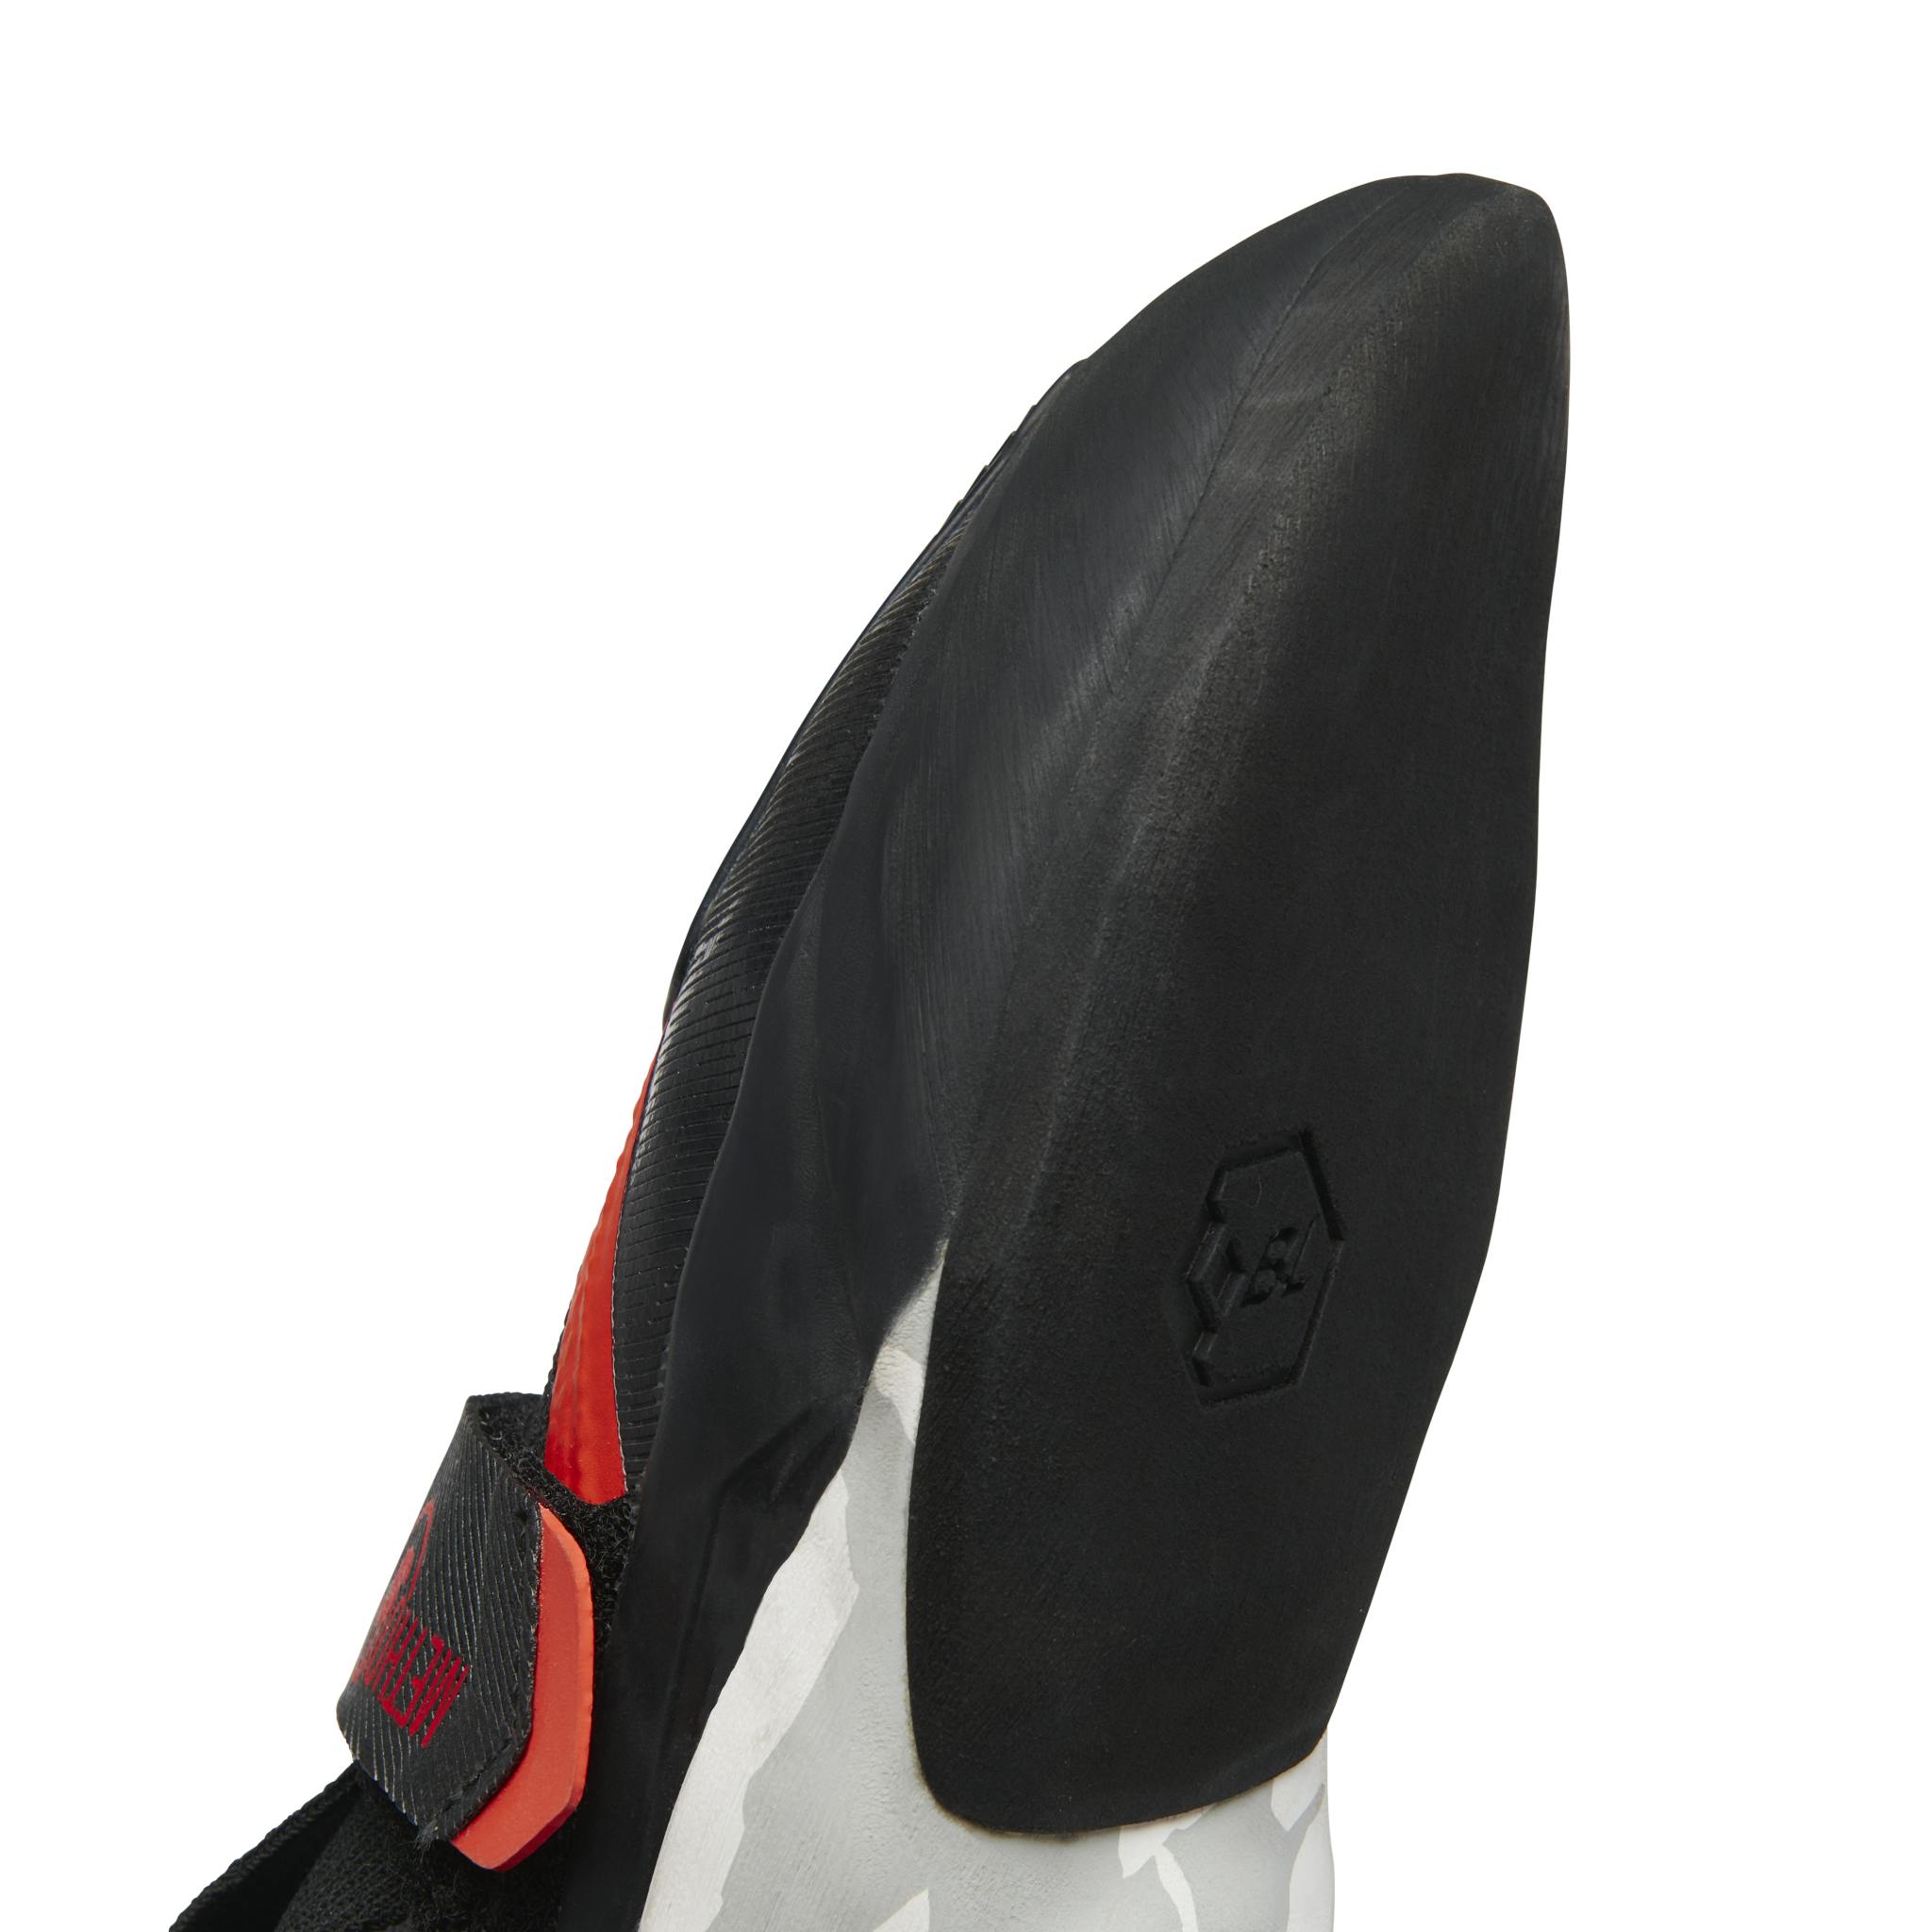 The slightly curved toe of the Men's Method S Climbing Shoe.